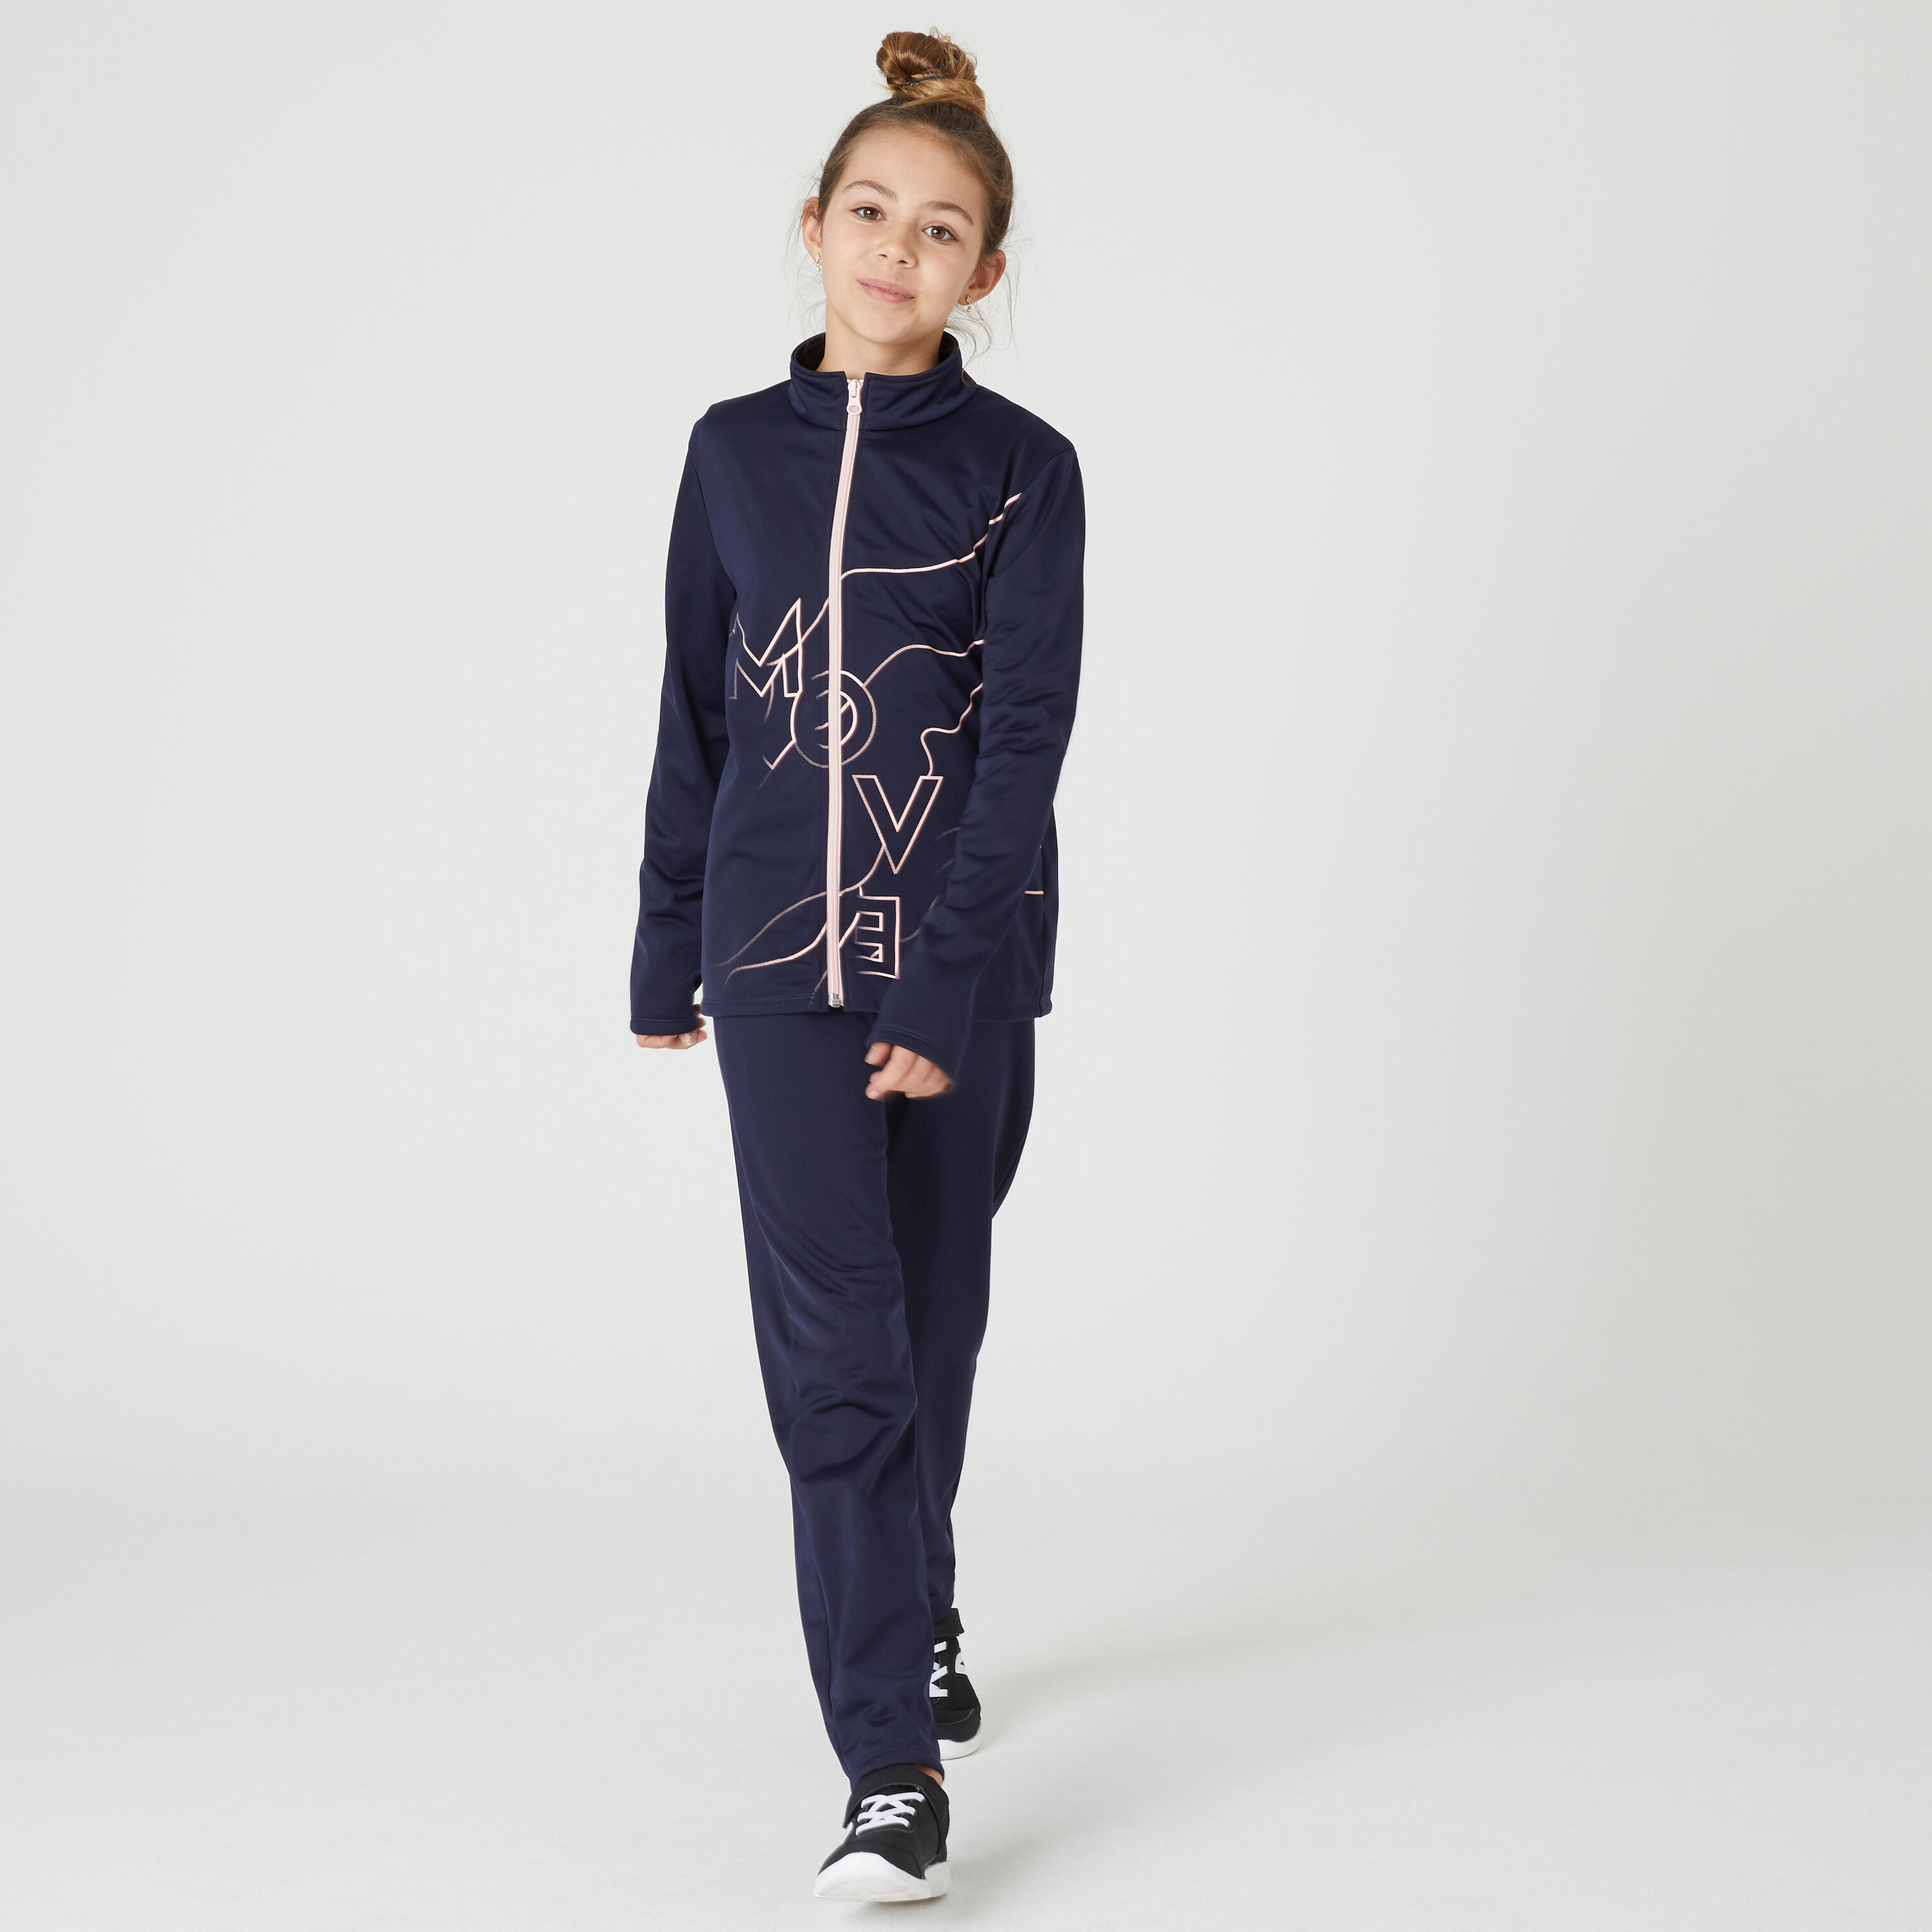 DOMYOS Kids' Breathable Synthetic Tracksuit Gym'Y - Blue/Print